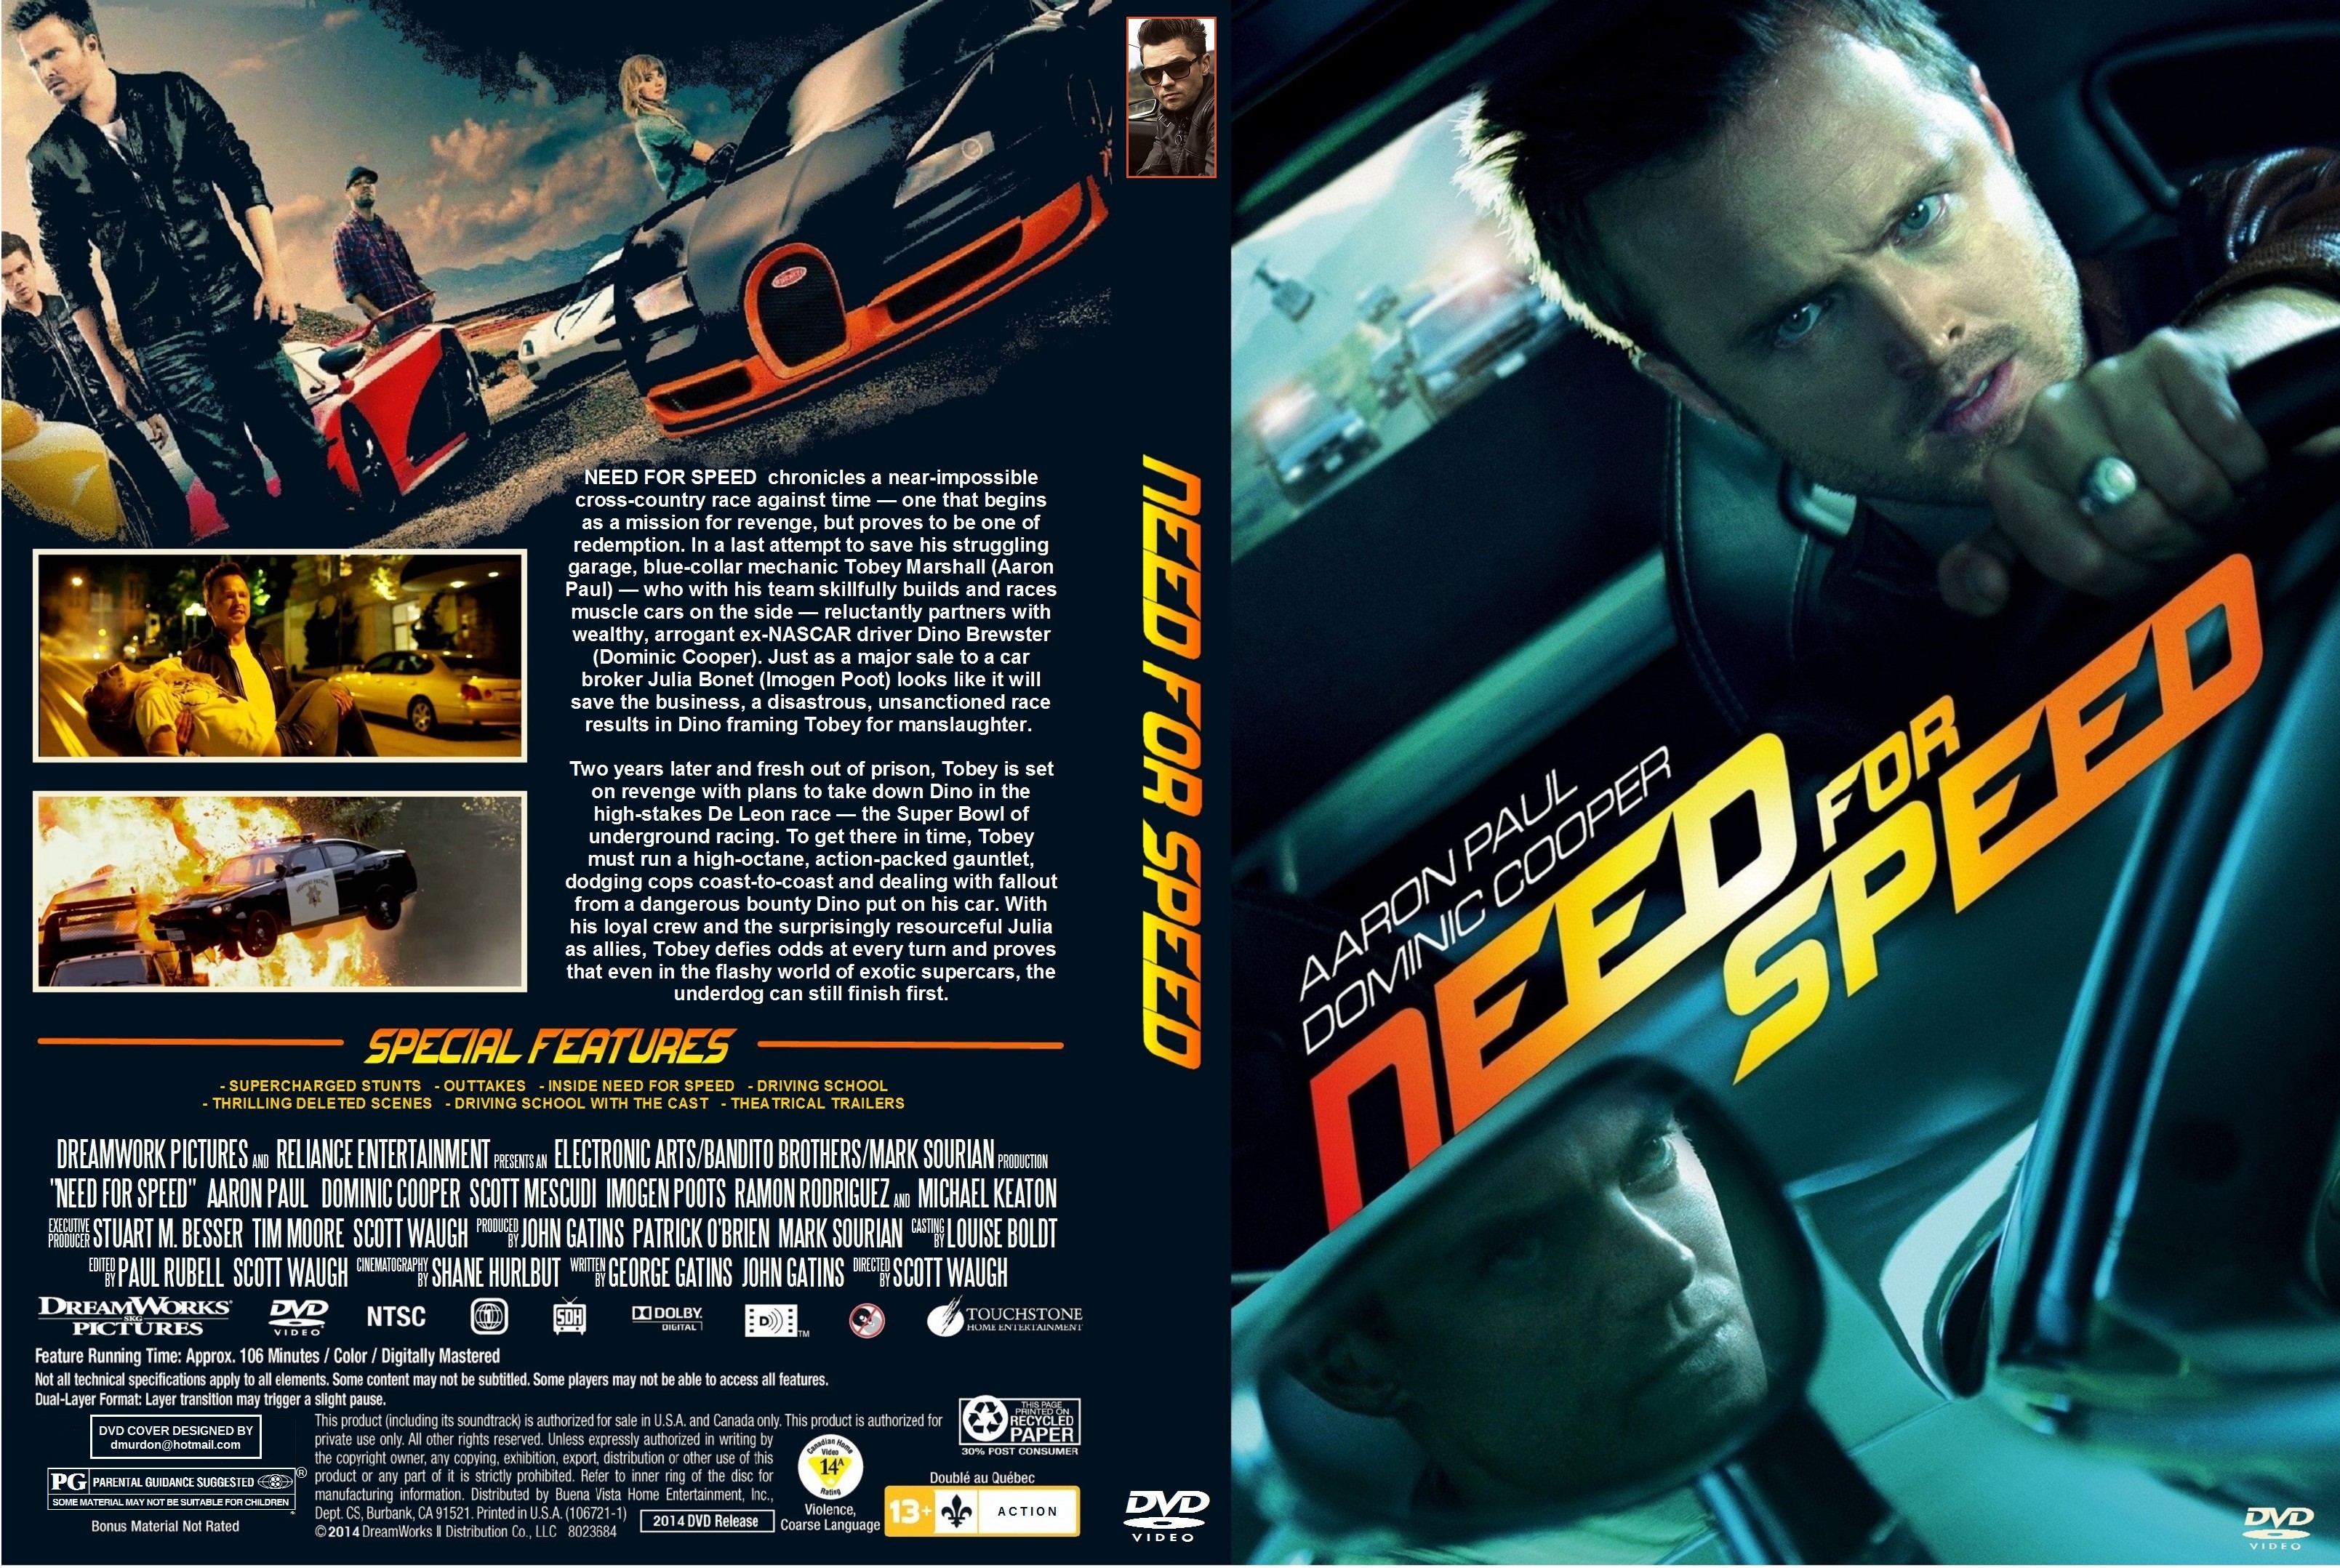  Need for Speed [DVD] [2014] : Movies & TV